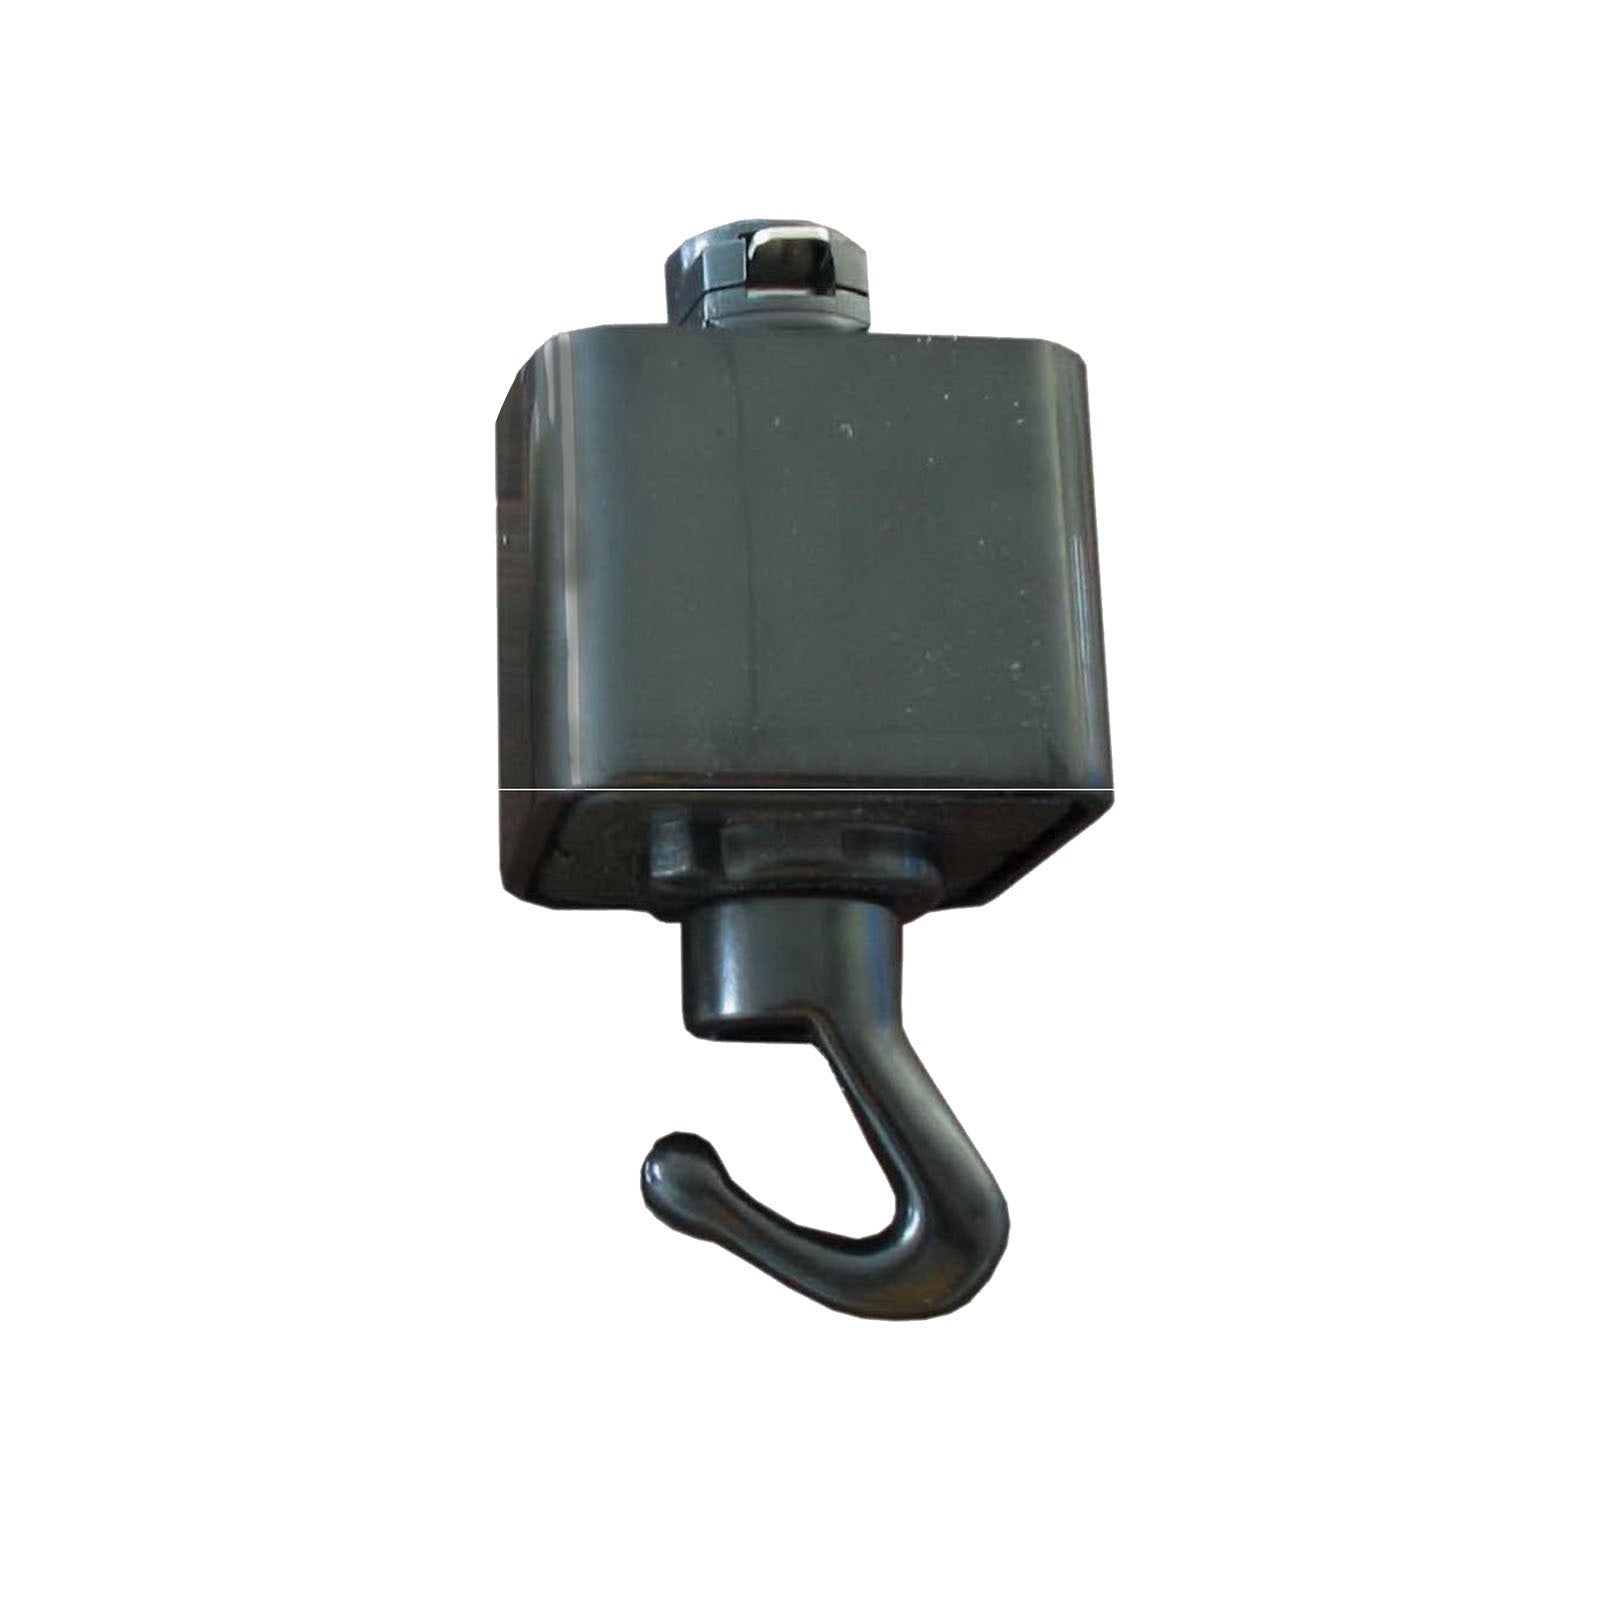 Pendant Hook Adapter With Power Feed Clip